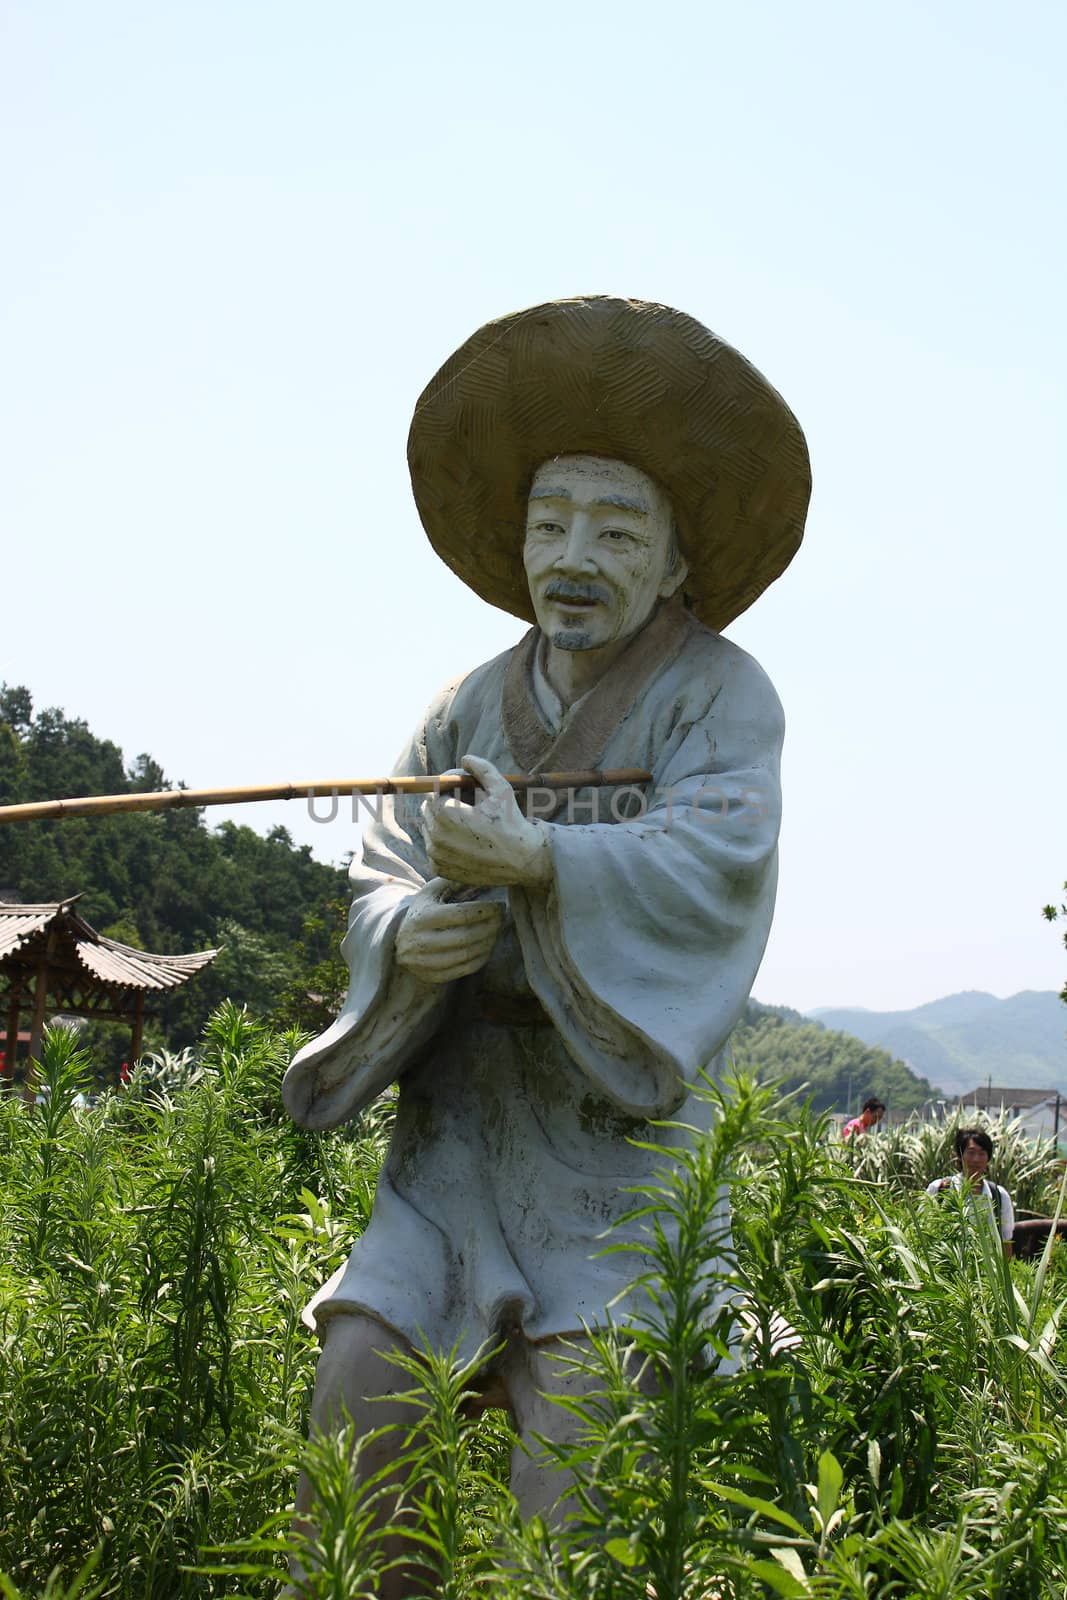 Fisherman's sculpture by limengdi